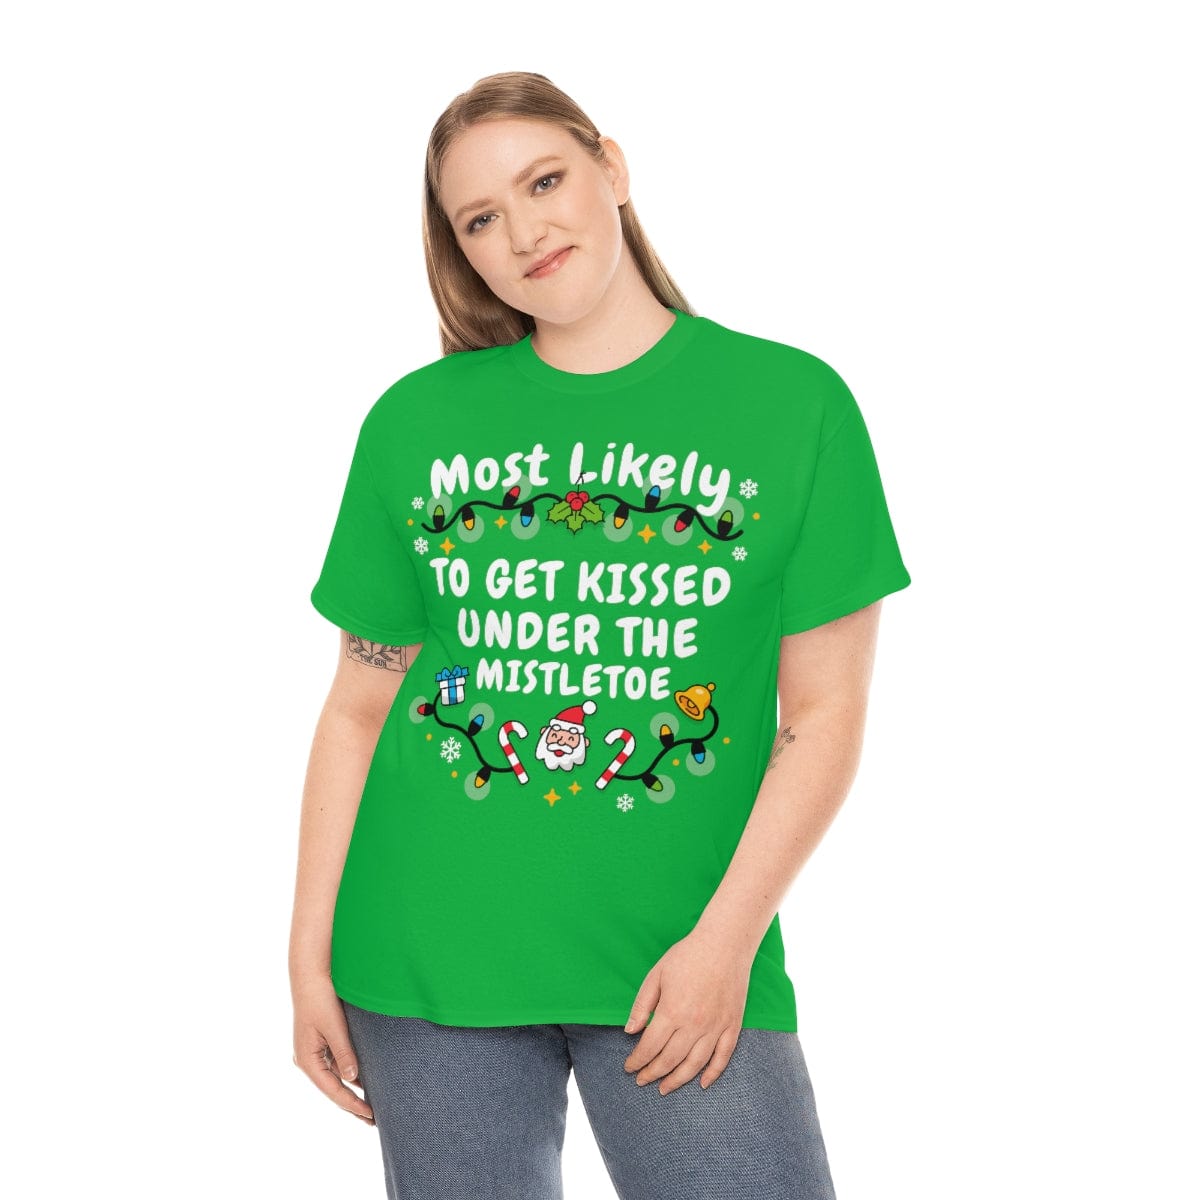 TO GET KISSED UNDER THE MISTLETOE